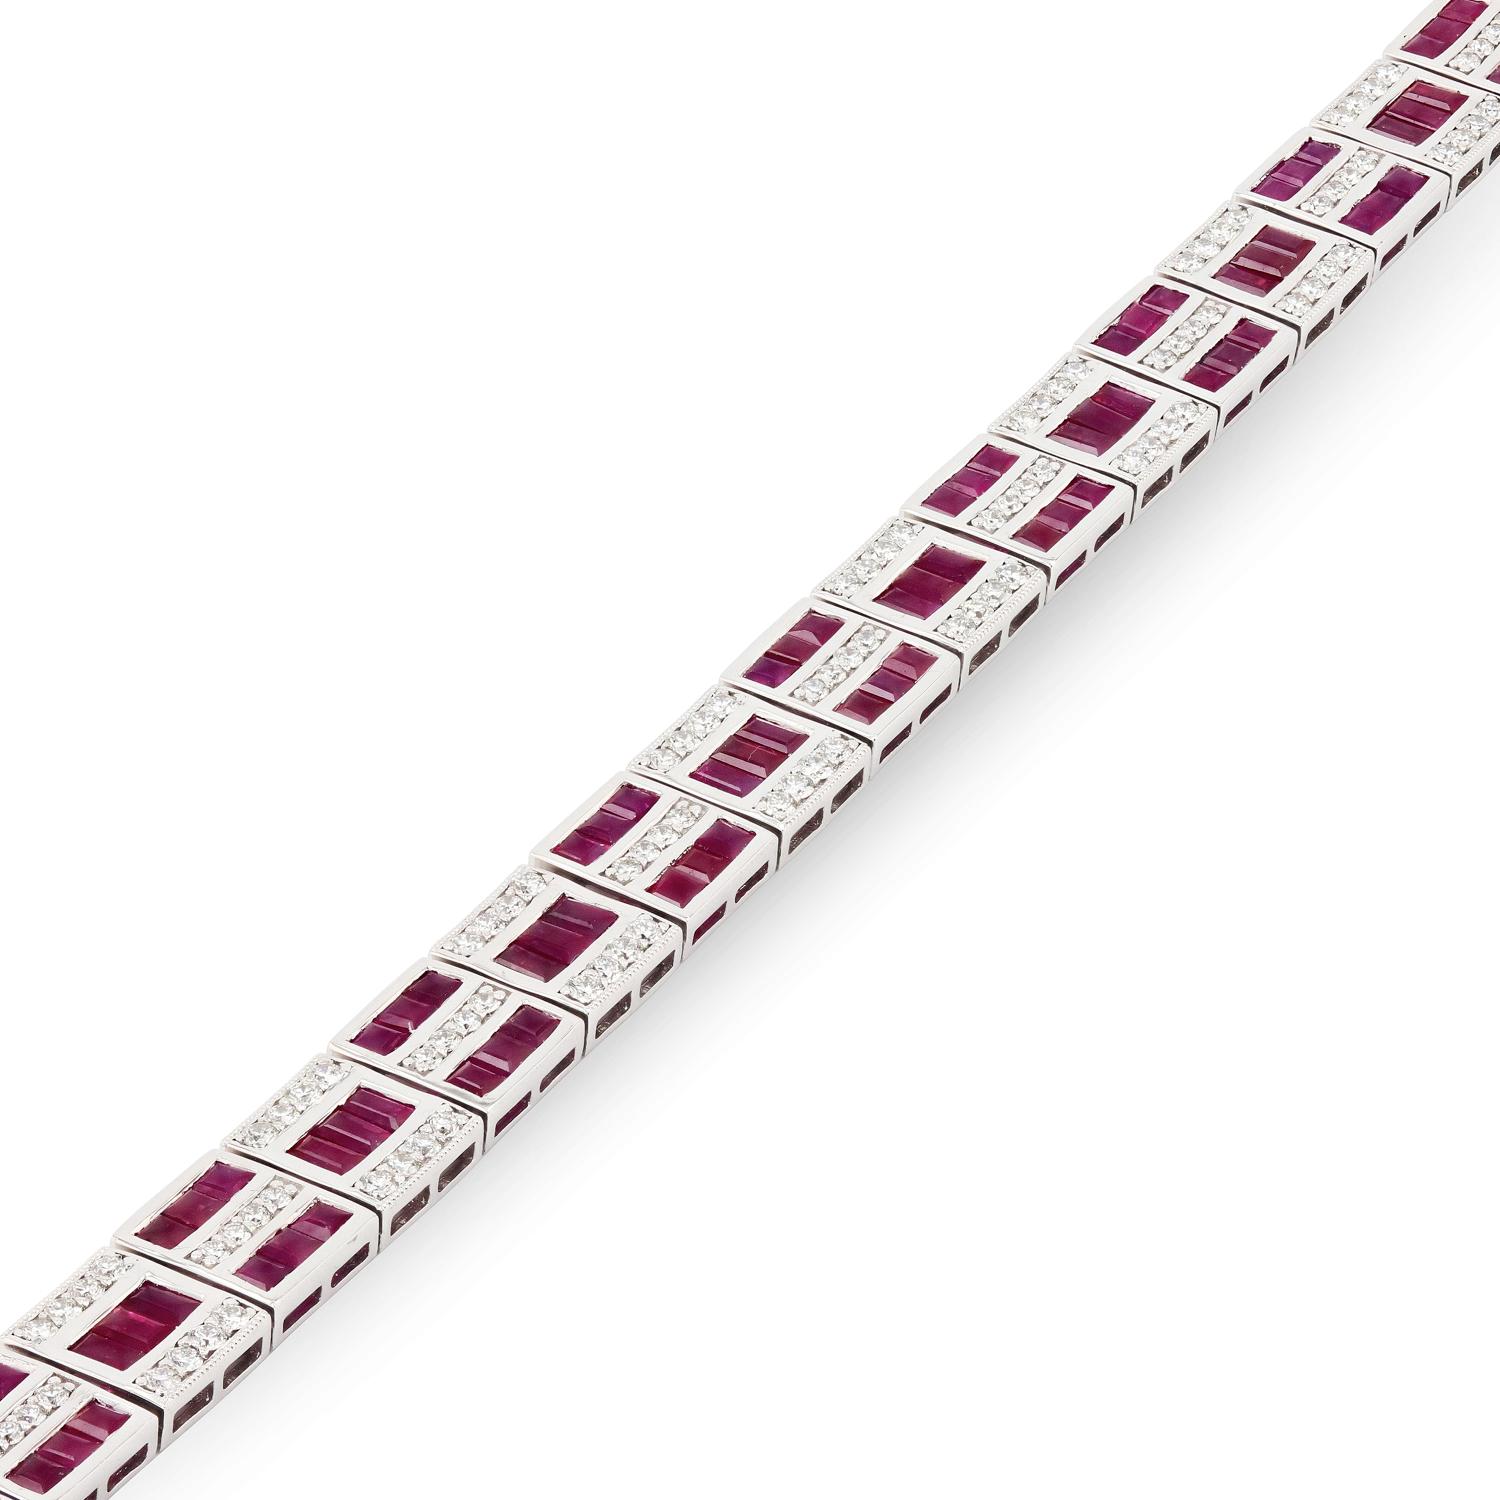 One polished, stamped, and tested platinum bracelet mounted with: 99 genuine faceted rubies weighing approximately 11.01 carats, and 132 genuine round diamonds weighing approximately 2.09 carats. The bracelet measures 7.25 inches in length and is